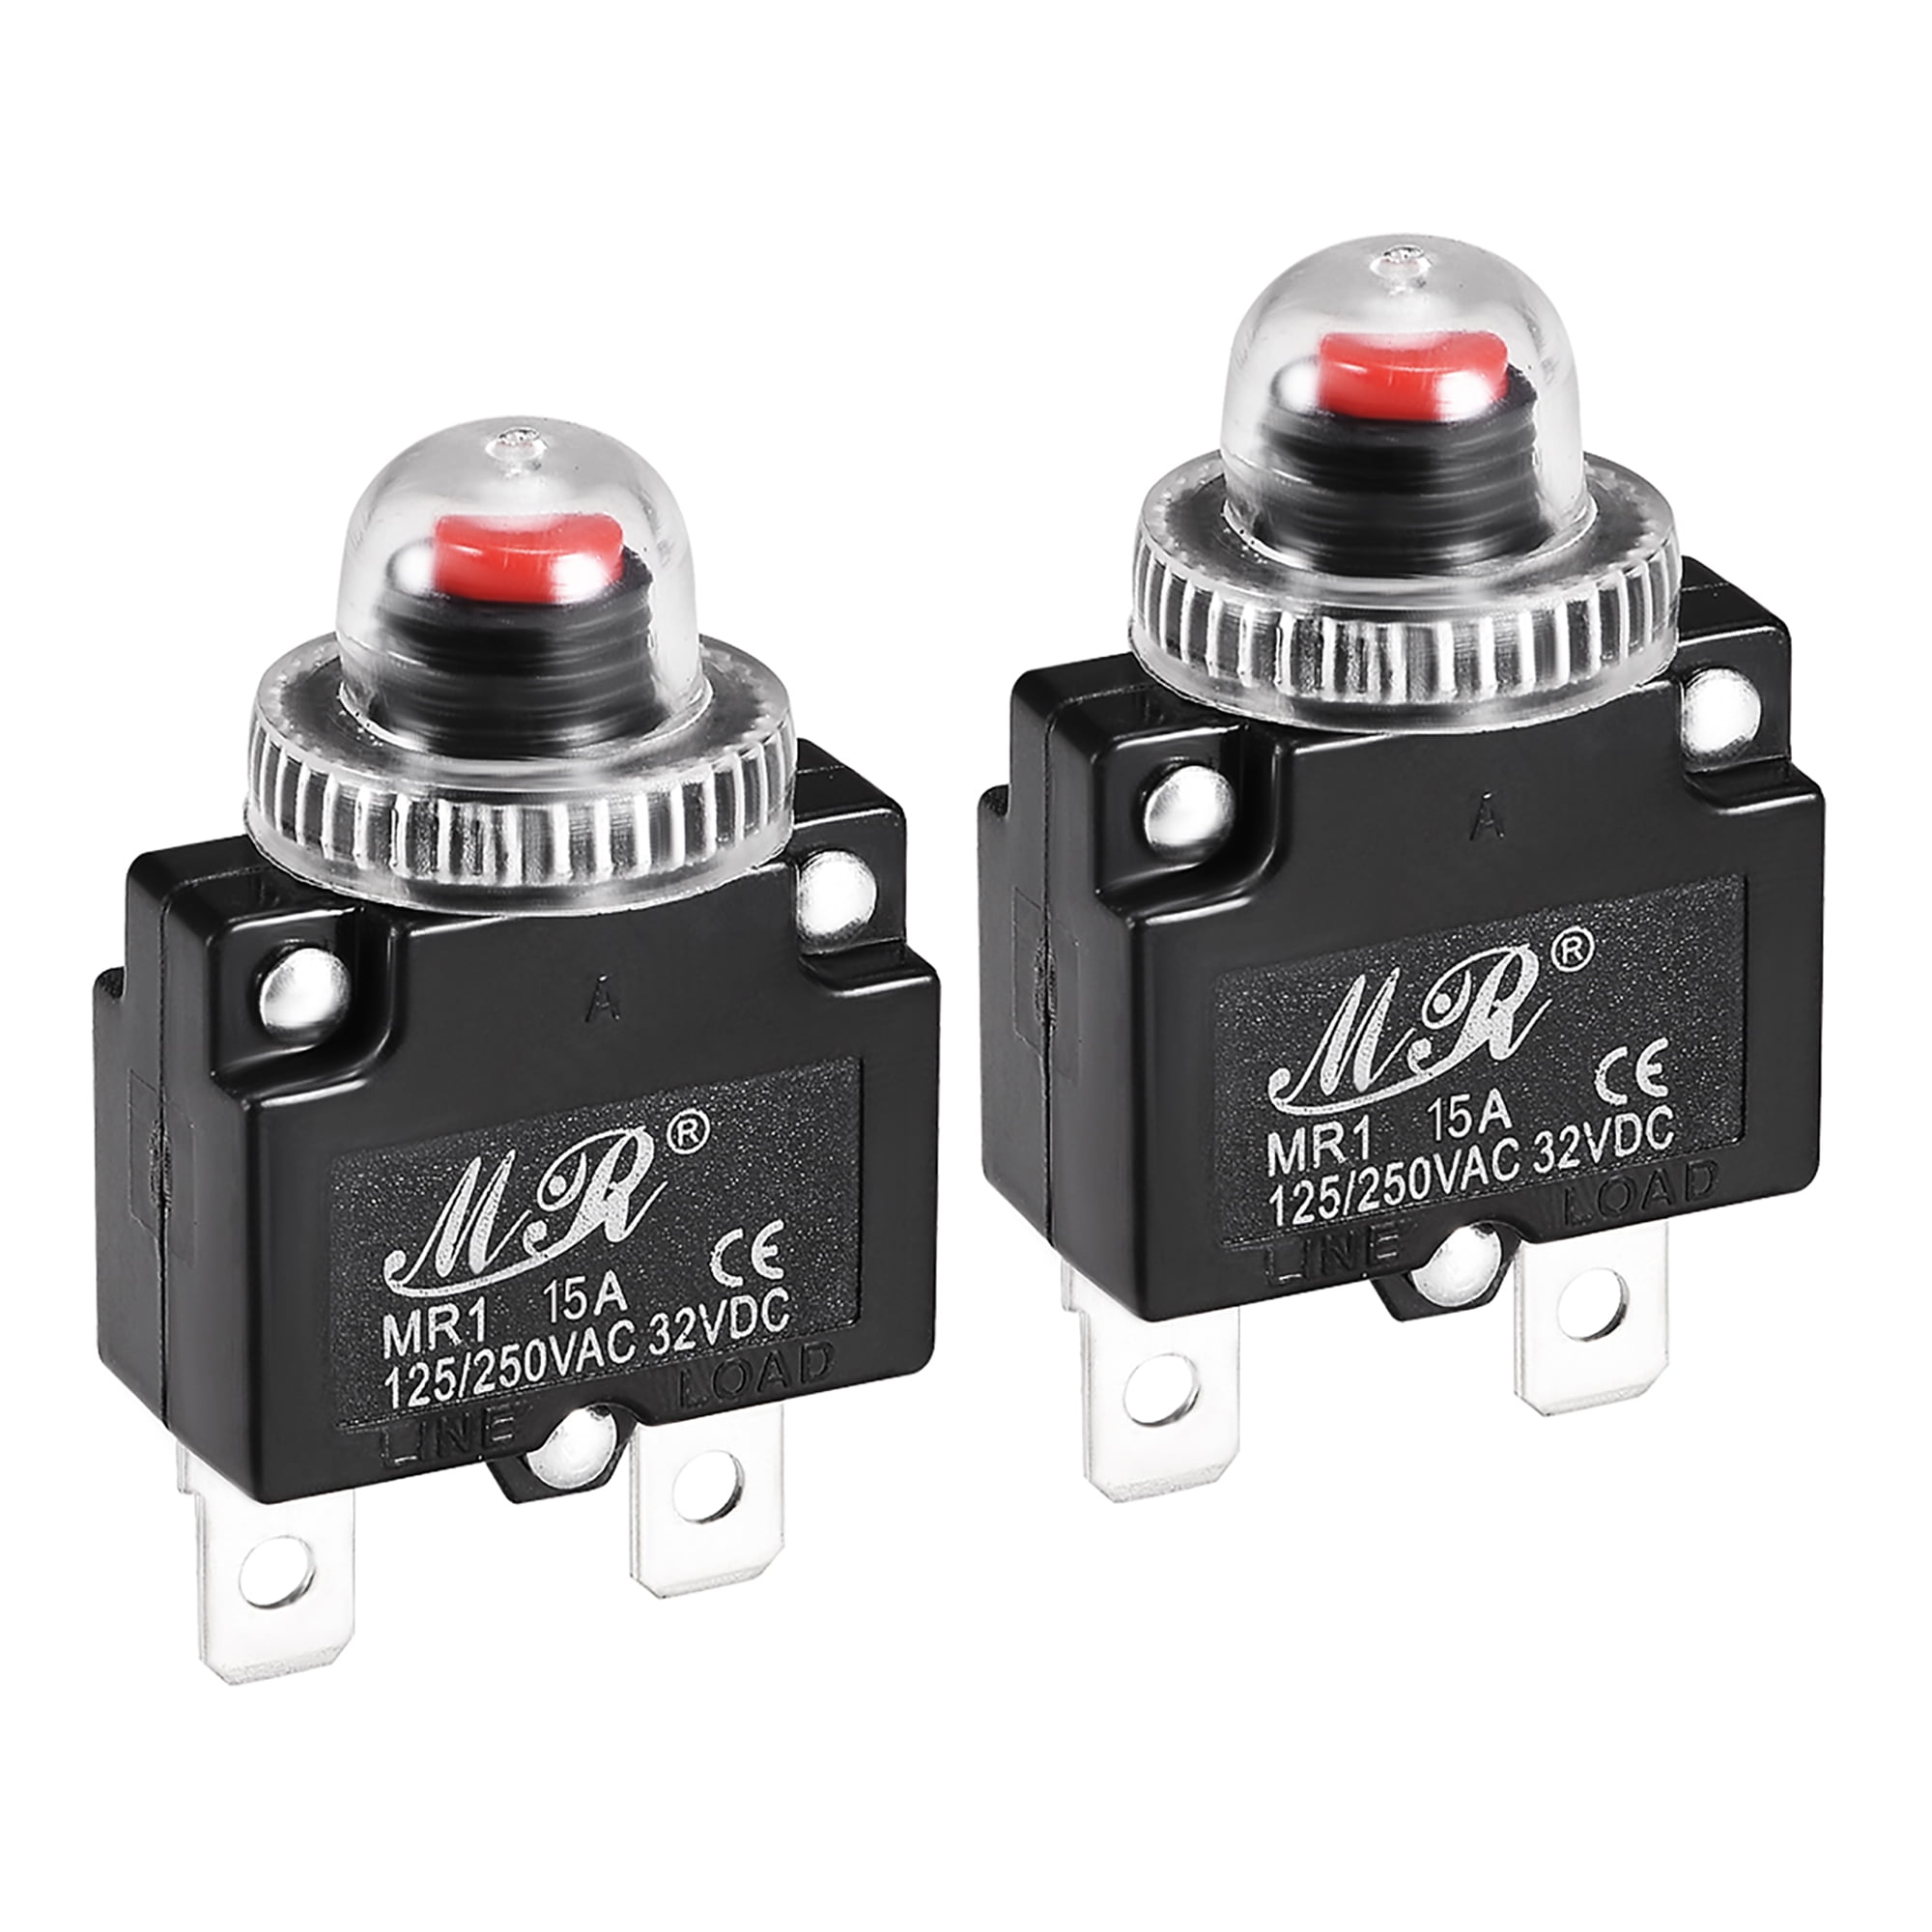 mxuteuk 2Pcs 20Amp Circuit Breakers Push Button Manual Reset 125/250V AC 50V DC L1 Series Overload Protector Switch Thermal Circuit Breakers with Waterproof Button Caps L1-ls-20A 